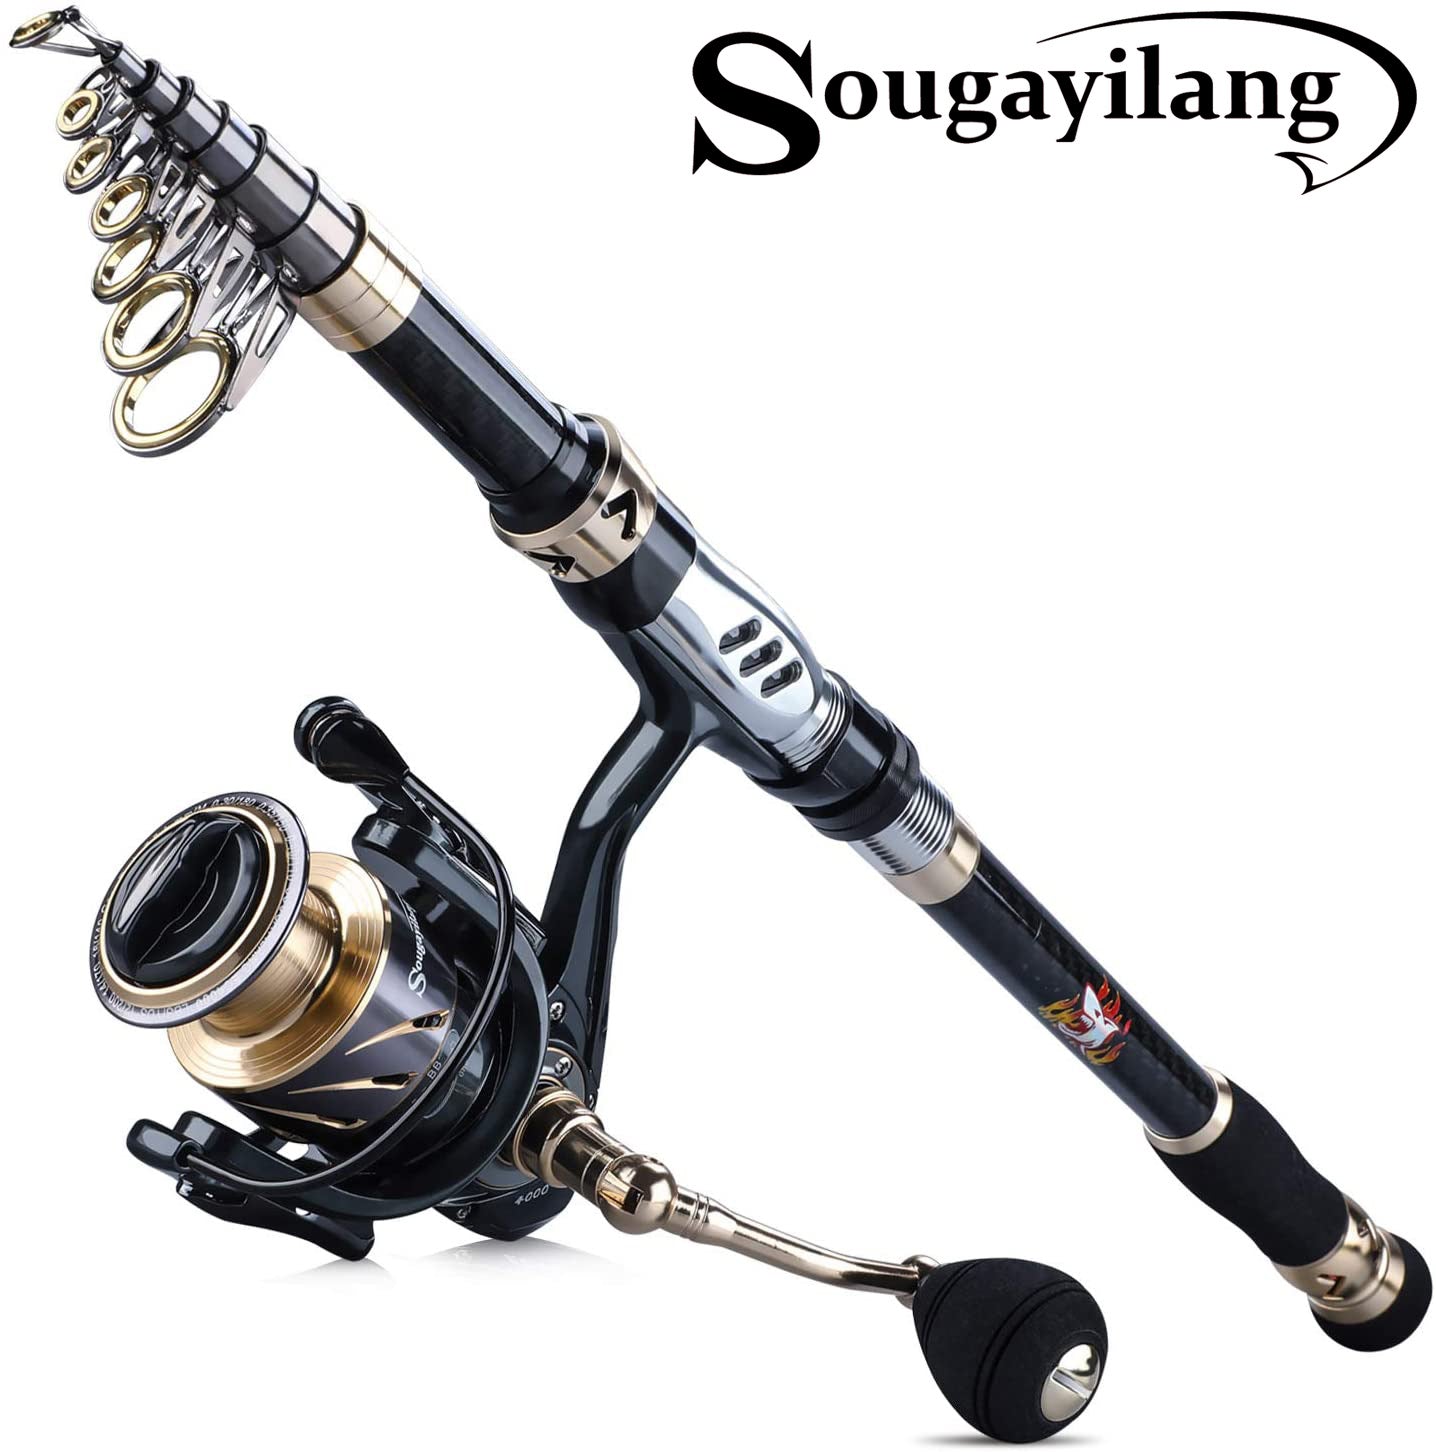 Sougayilang Mini Spinning Fishing Rod and Reel Combos Portable Pocket  Telescopic Fishing Pole Spinning Fishing Reel for Kids & Adults Travel  Freshwater Fishing-24M/787FT Rod WQ4000 Reel